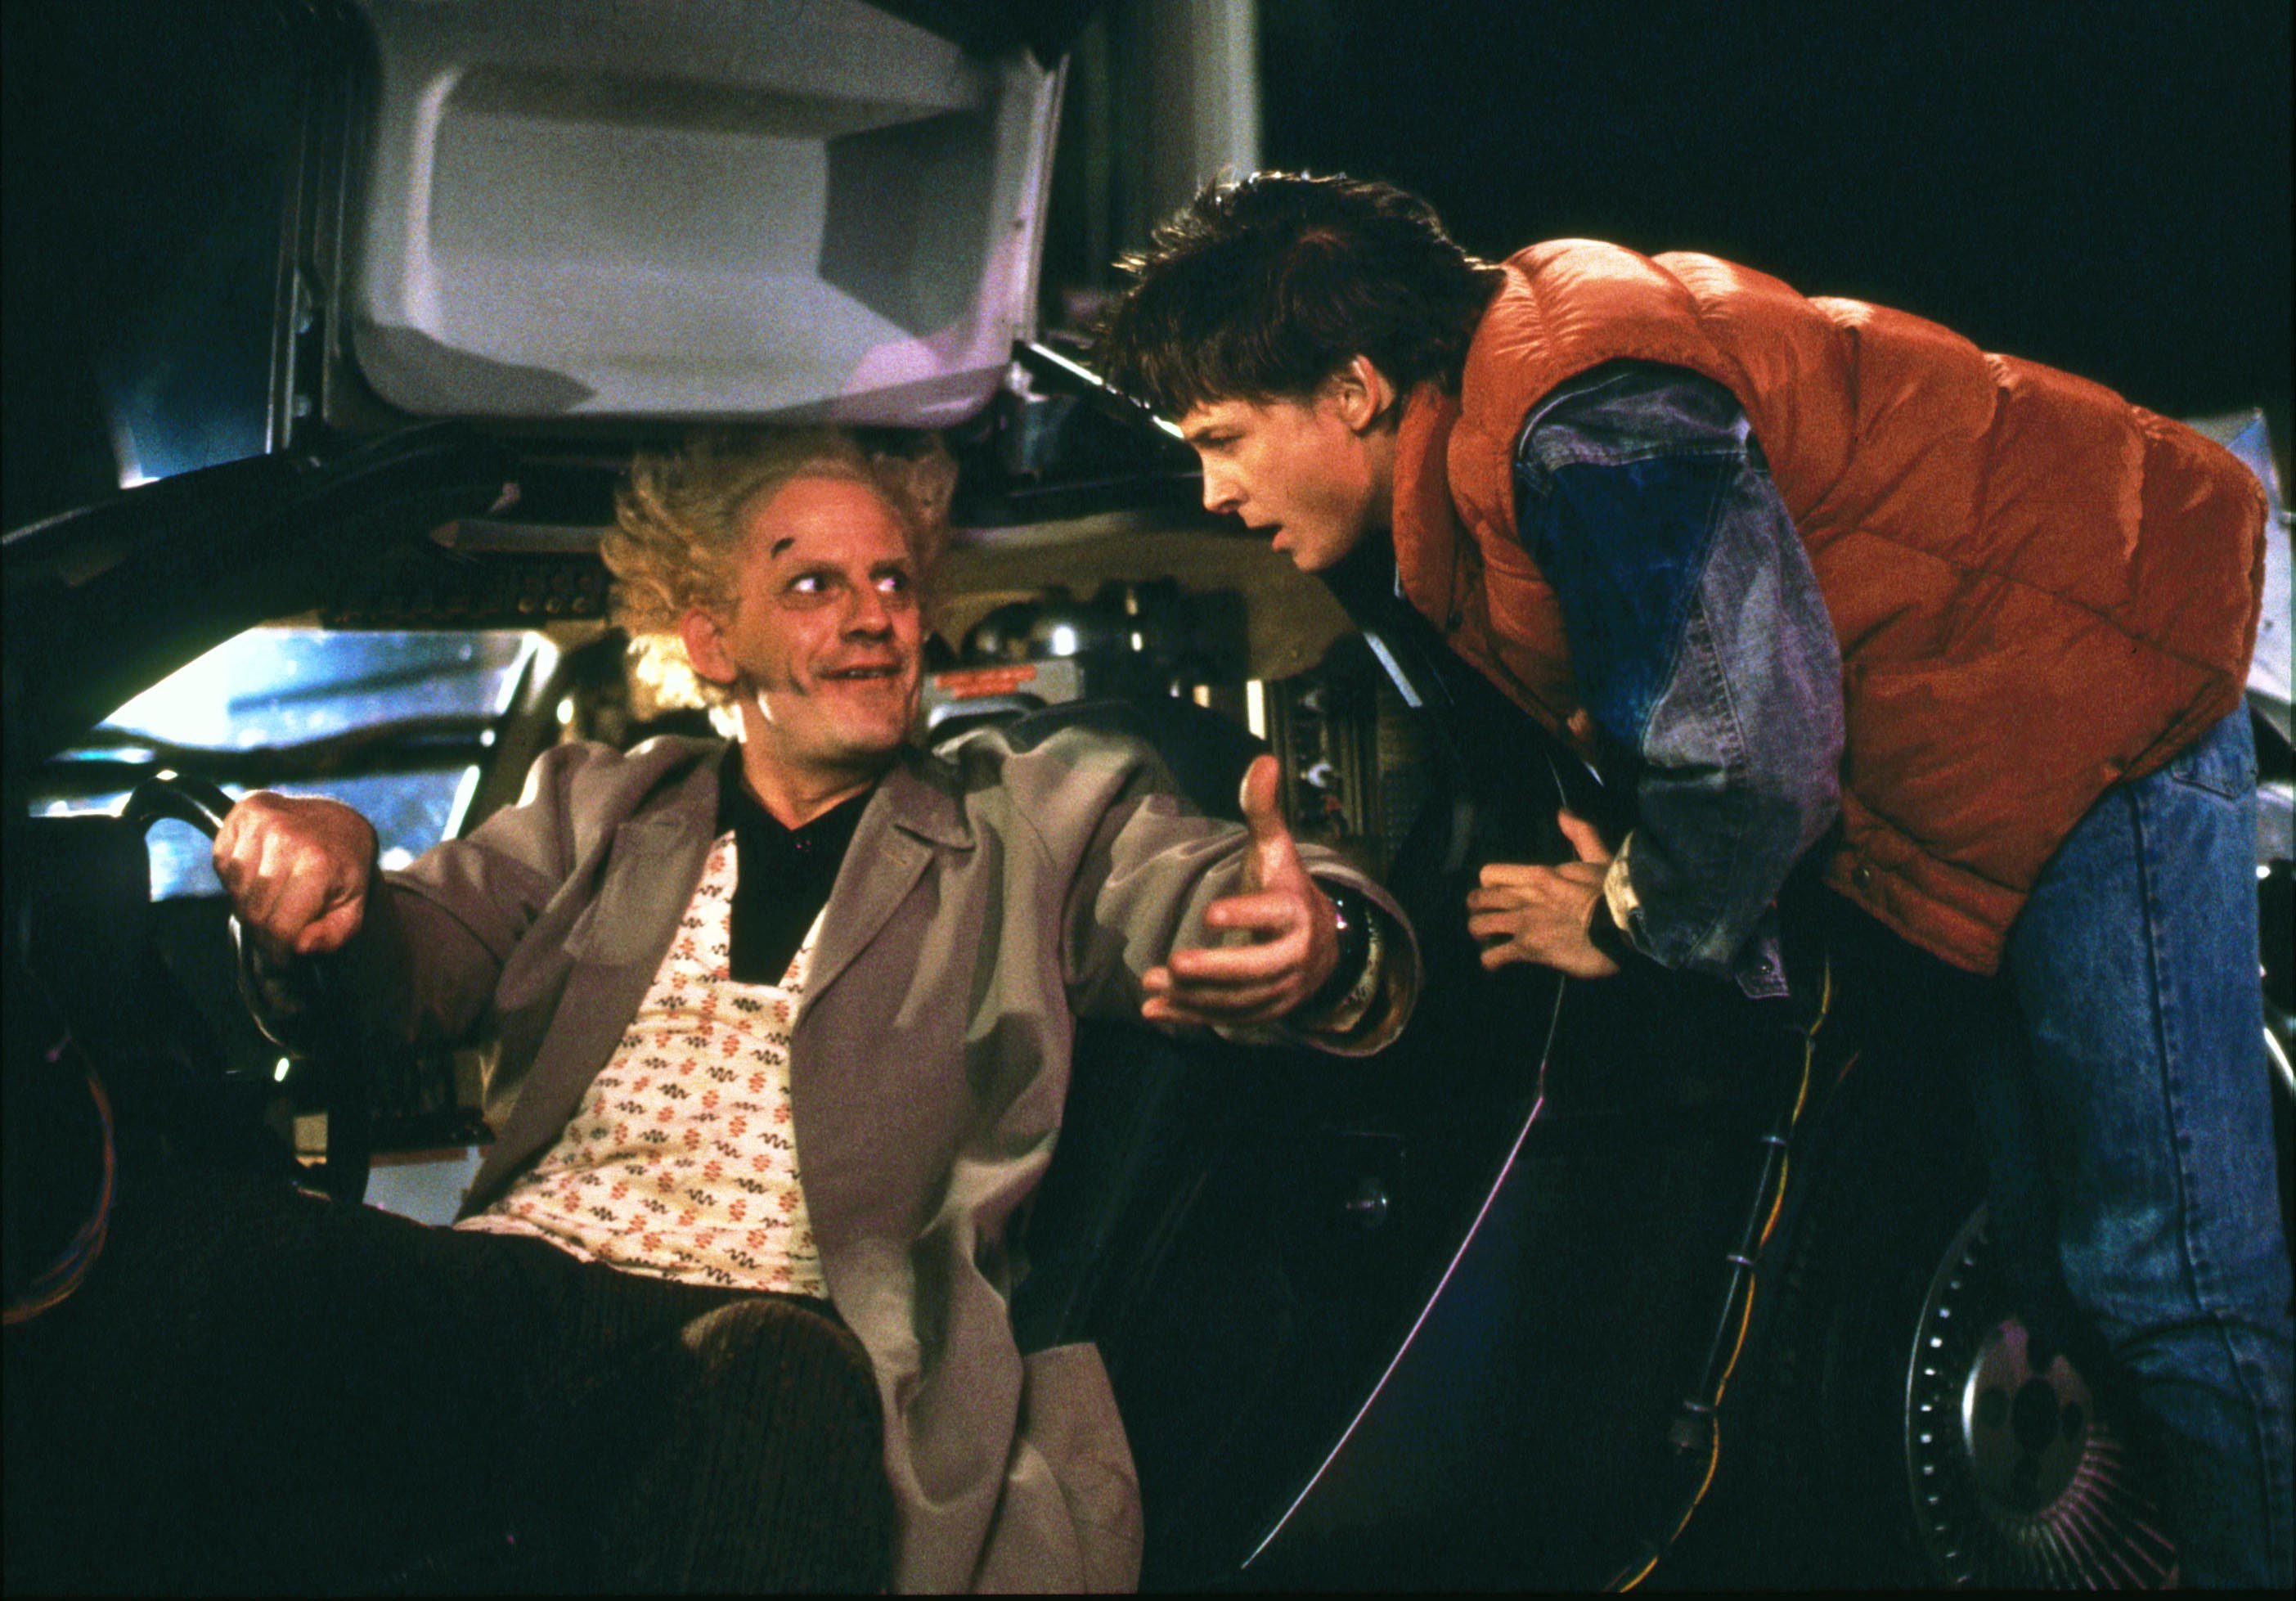 Editorial use only. No book cover usage. Mandatory Credit: Photo by Amblin Entertainment/Universal Pictures/Kobal/Shutterstock (5886092ab) Christopher Lloyd, Michael J. Fox Back To The Future - 1985 Director: Robert Zemeckis Amblin Entertainment/Universal Pictures USA Scene Still Scifi Retour vers le futur